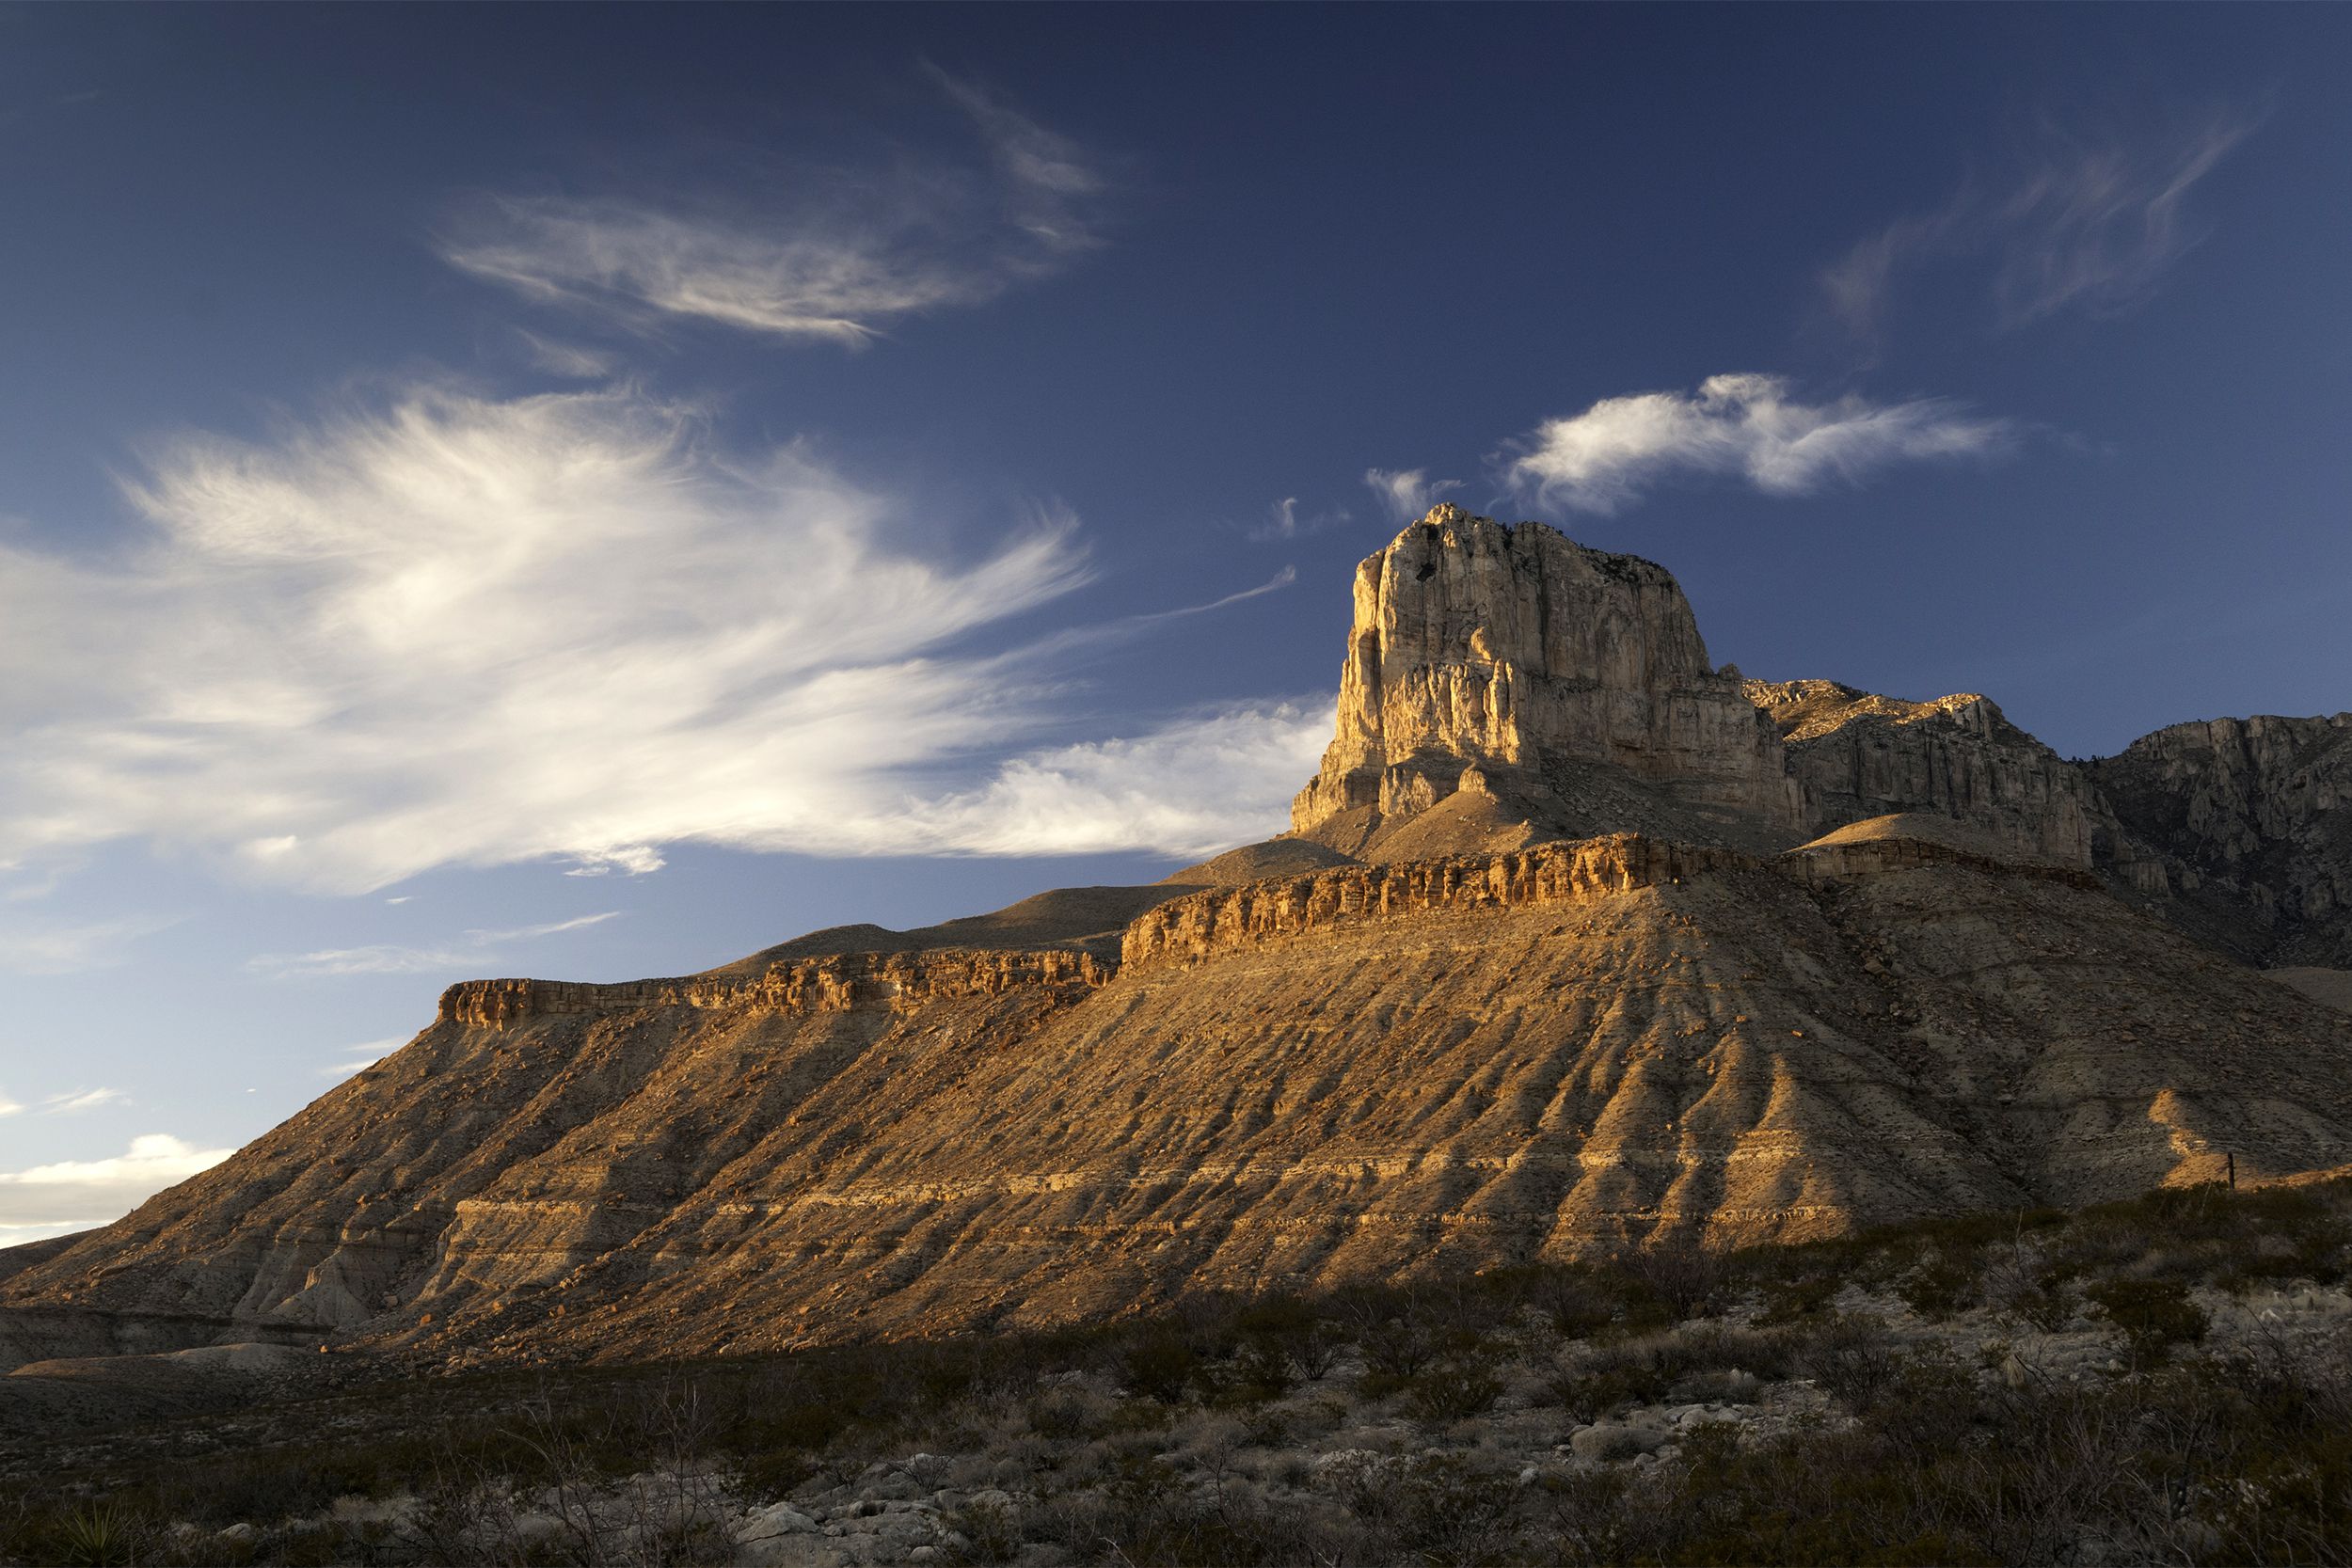 <p>Within the boundaries of <a href="https://www.nps.gov/gumo/index.htm">Guadalupe Mountains National Park</a>, visitors will find the four highest peaks in Texas. There's also a diverse array of flora and fauna here, as well as canyons, desert, and dunes.</p>